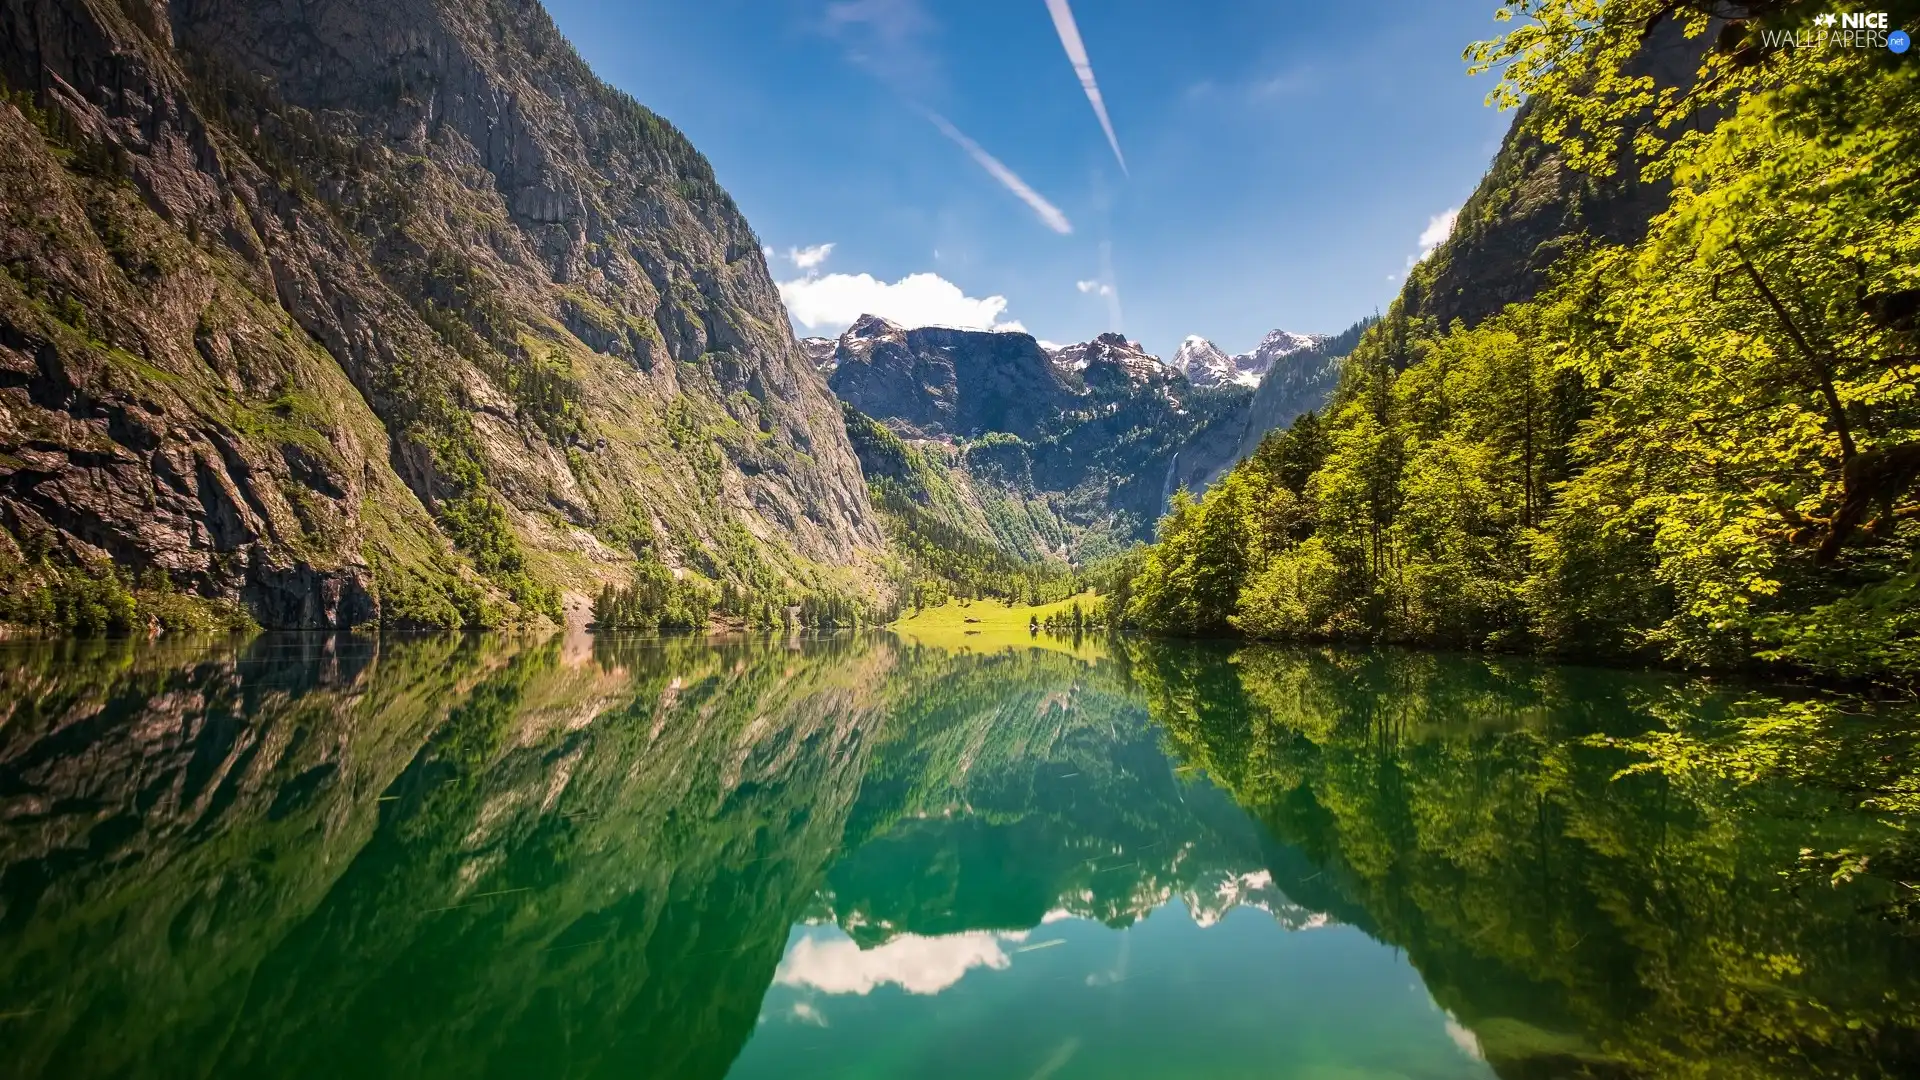 trees, viewes, Germany, reflection, Bavaria, Obersee Lake, Mountains, Berchtesgaden National Park